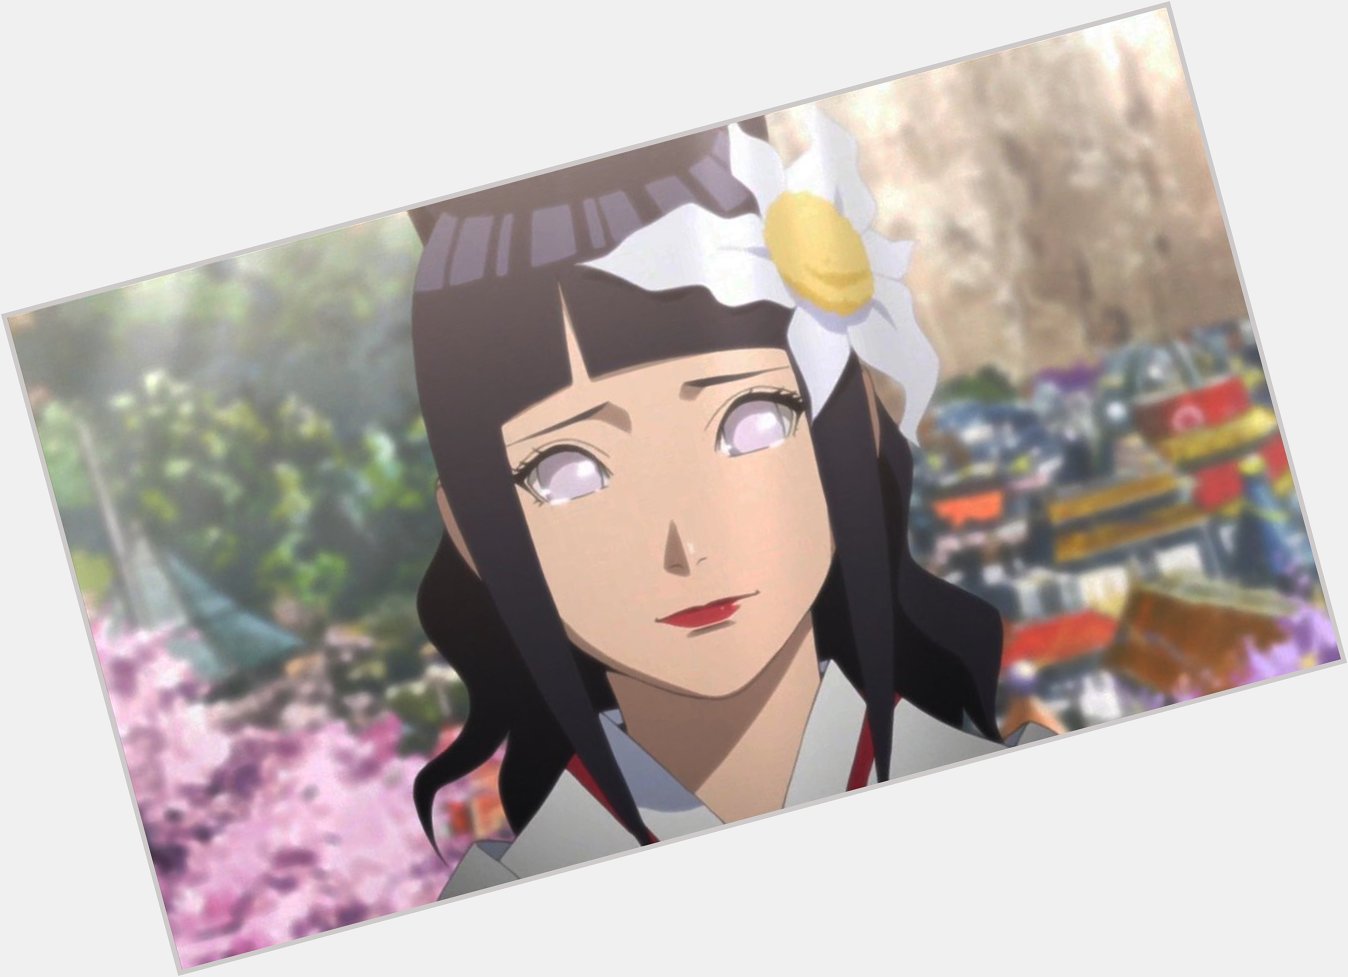 The most beautiful character in anime
Happy Birthday Hinata  